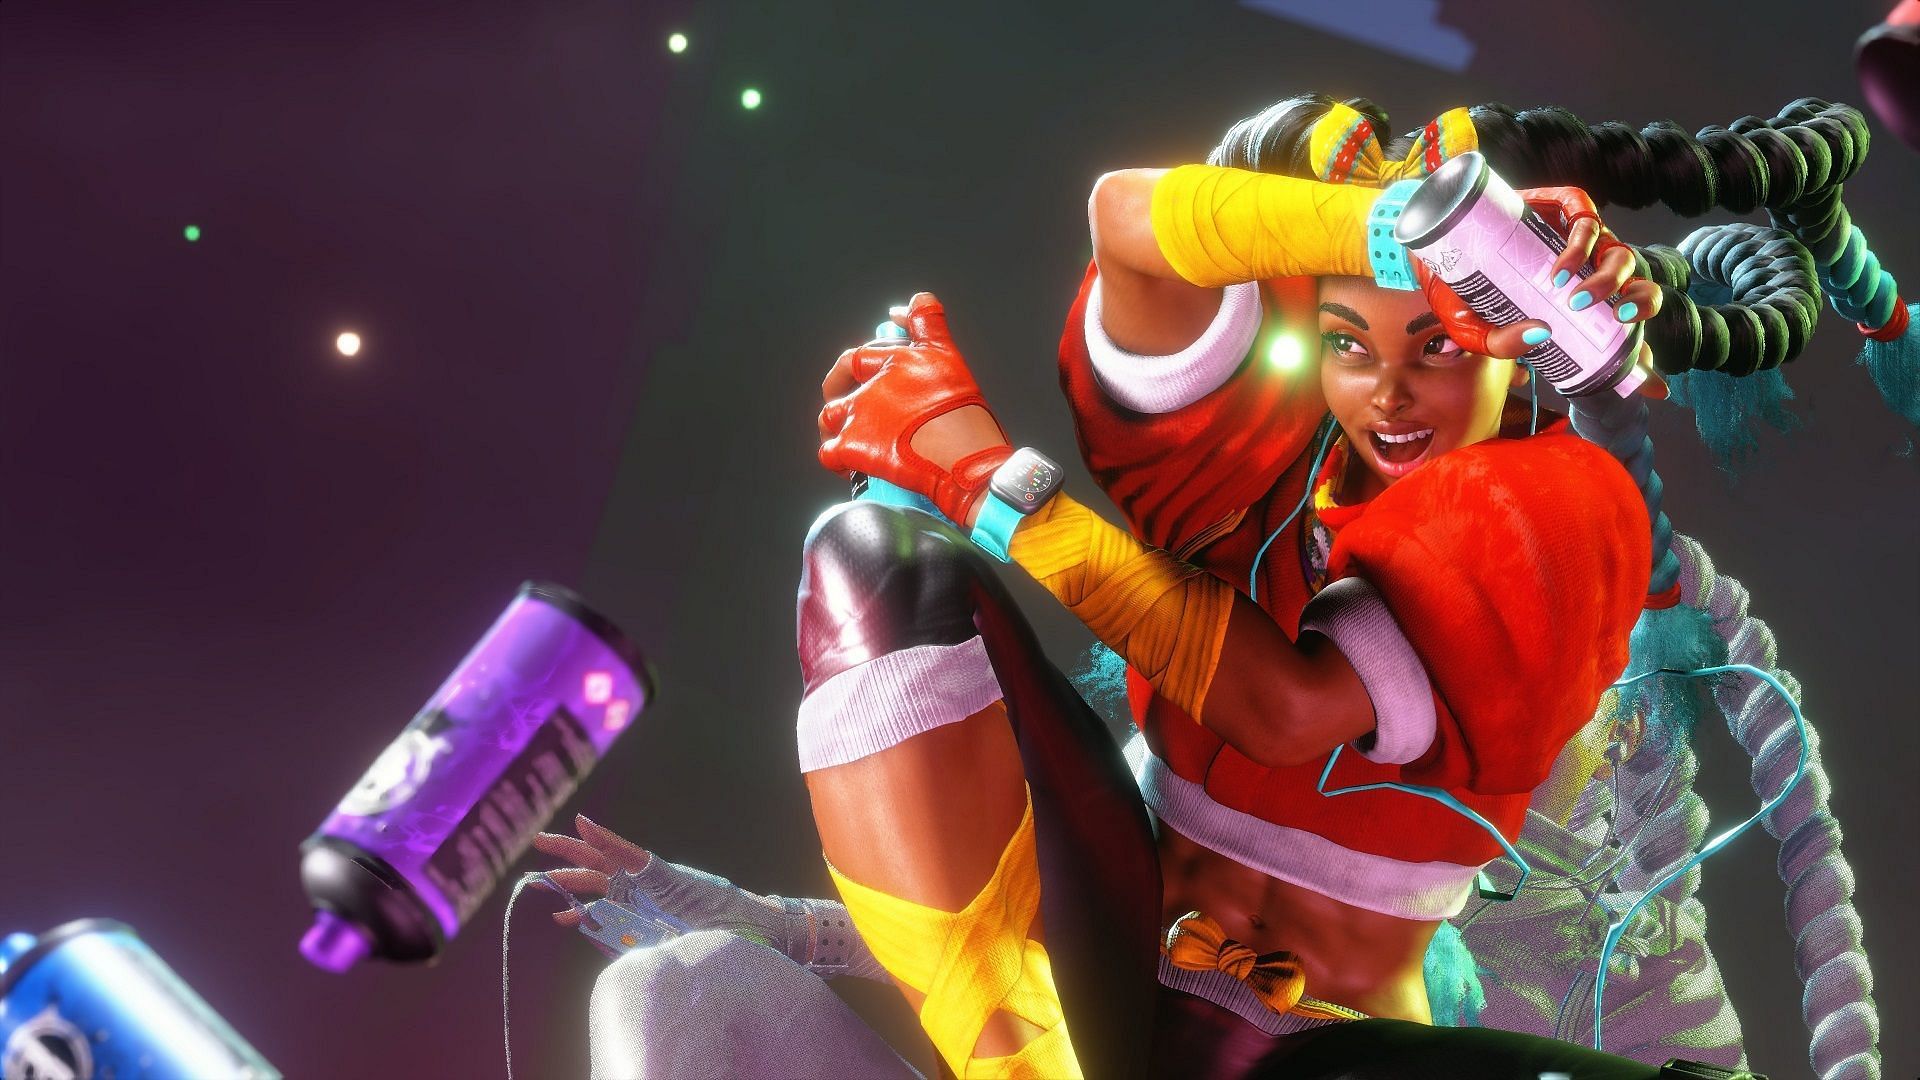 Kimberly is one of the seven new characters in Street Fighter 6. (Credits: Capcom)